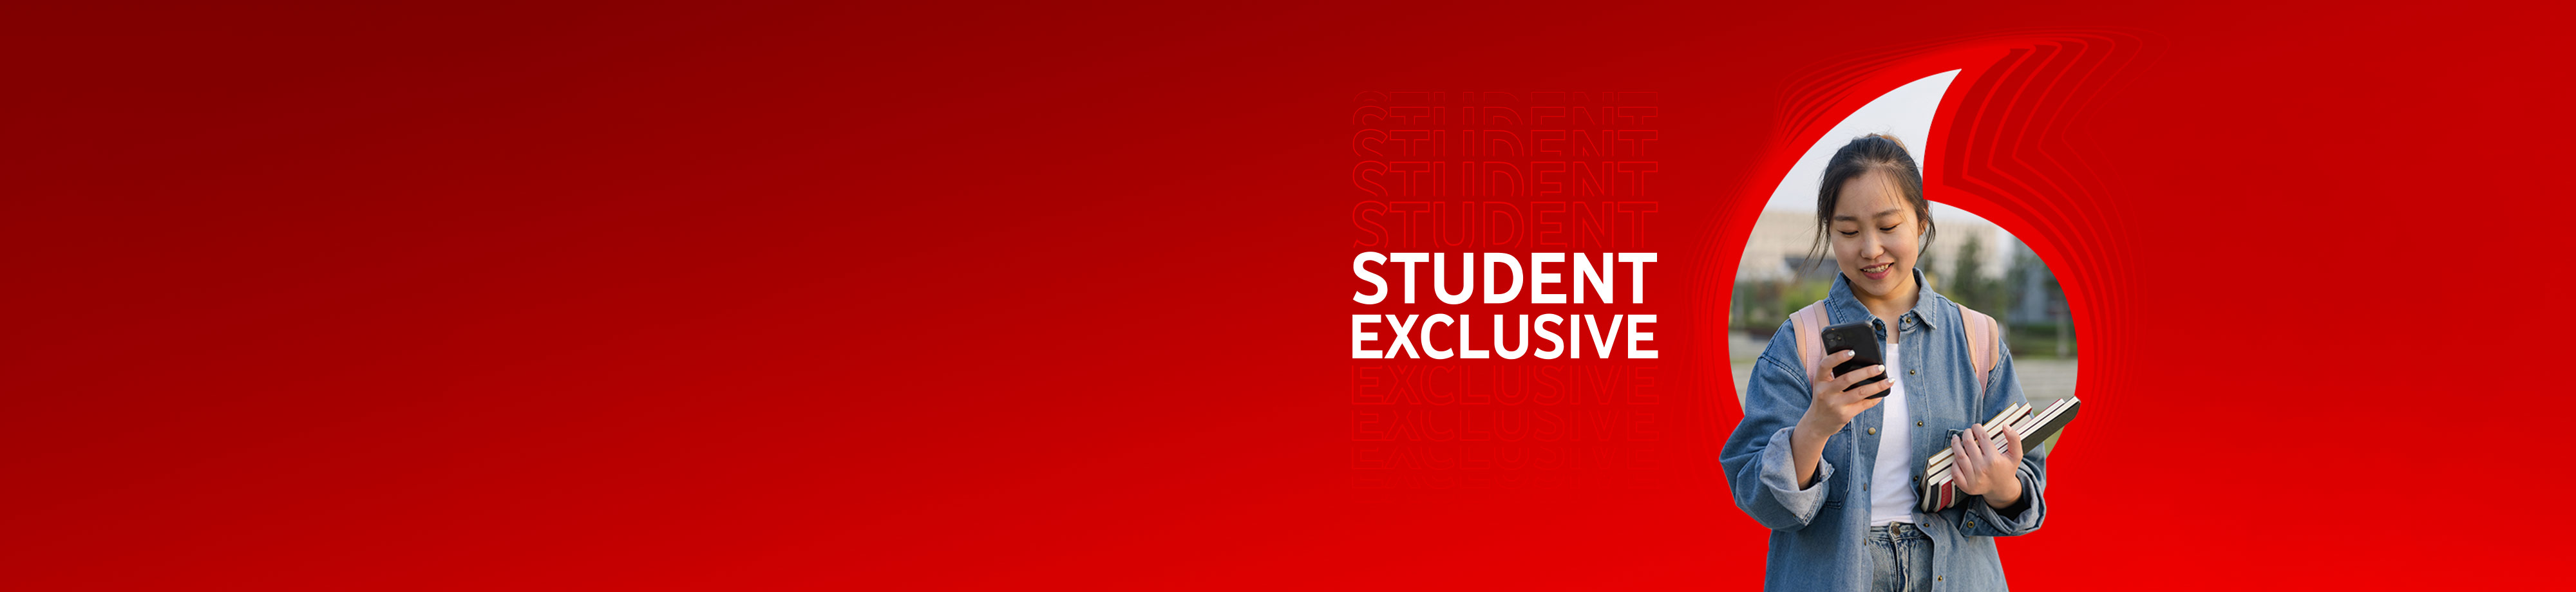 Vodafone Exclusive offers for students